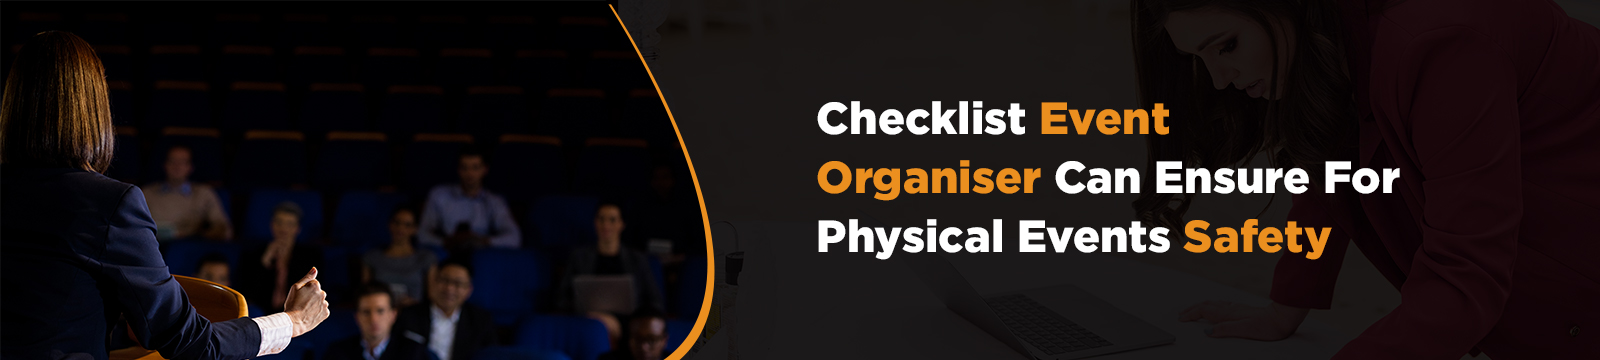 Checklist Event Organiser Can Ensure For Physical Events Safety